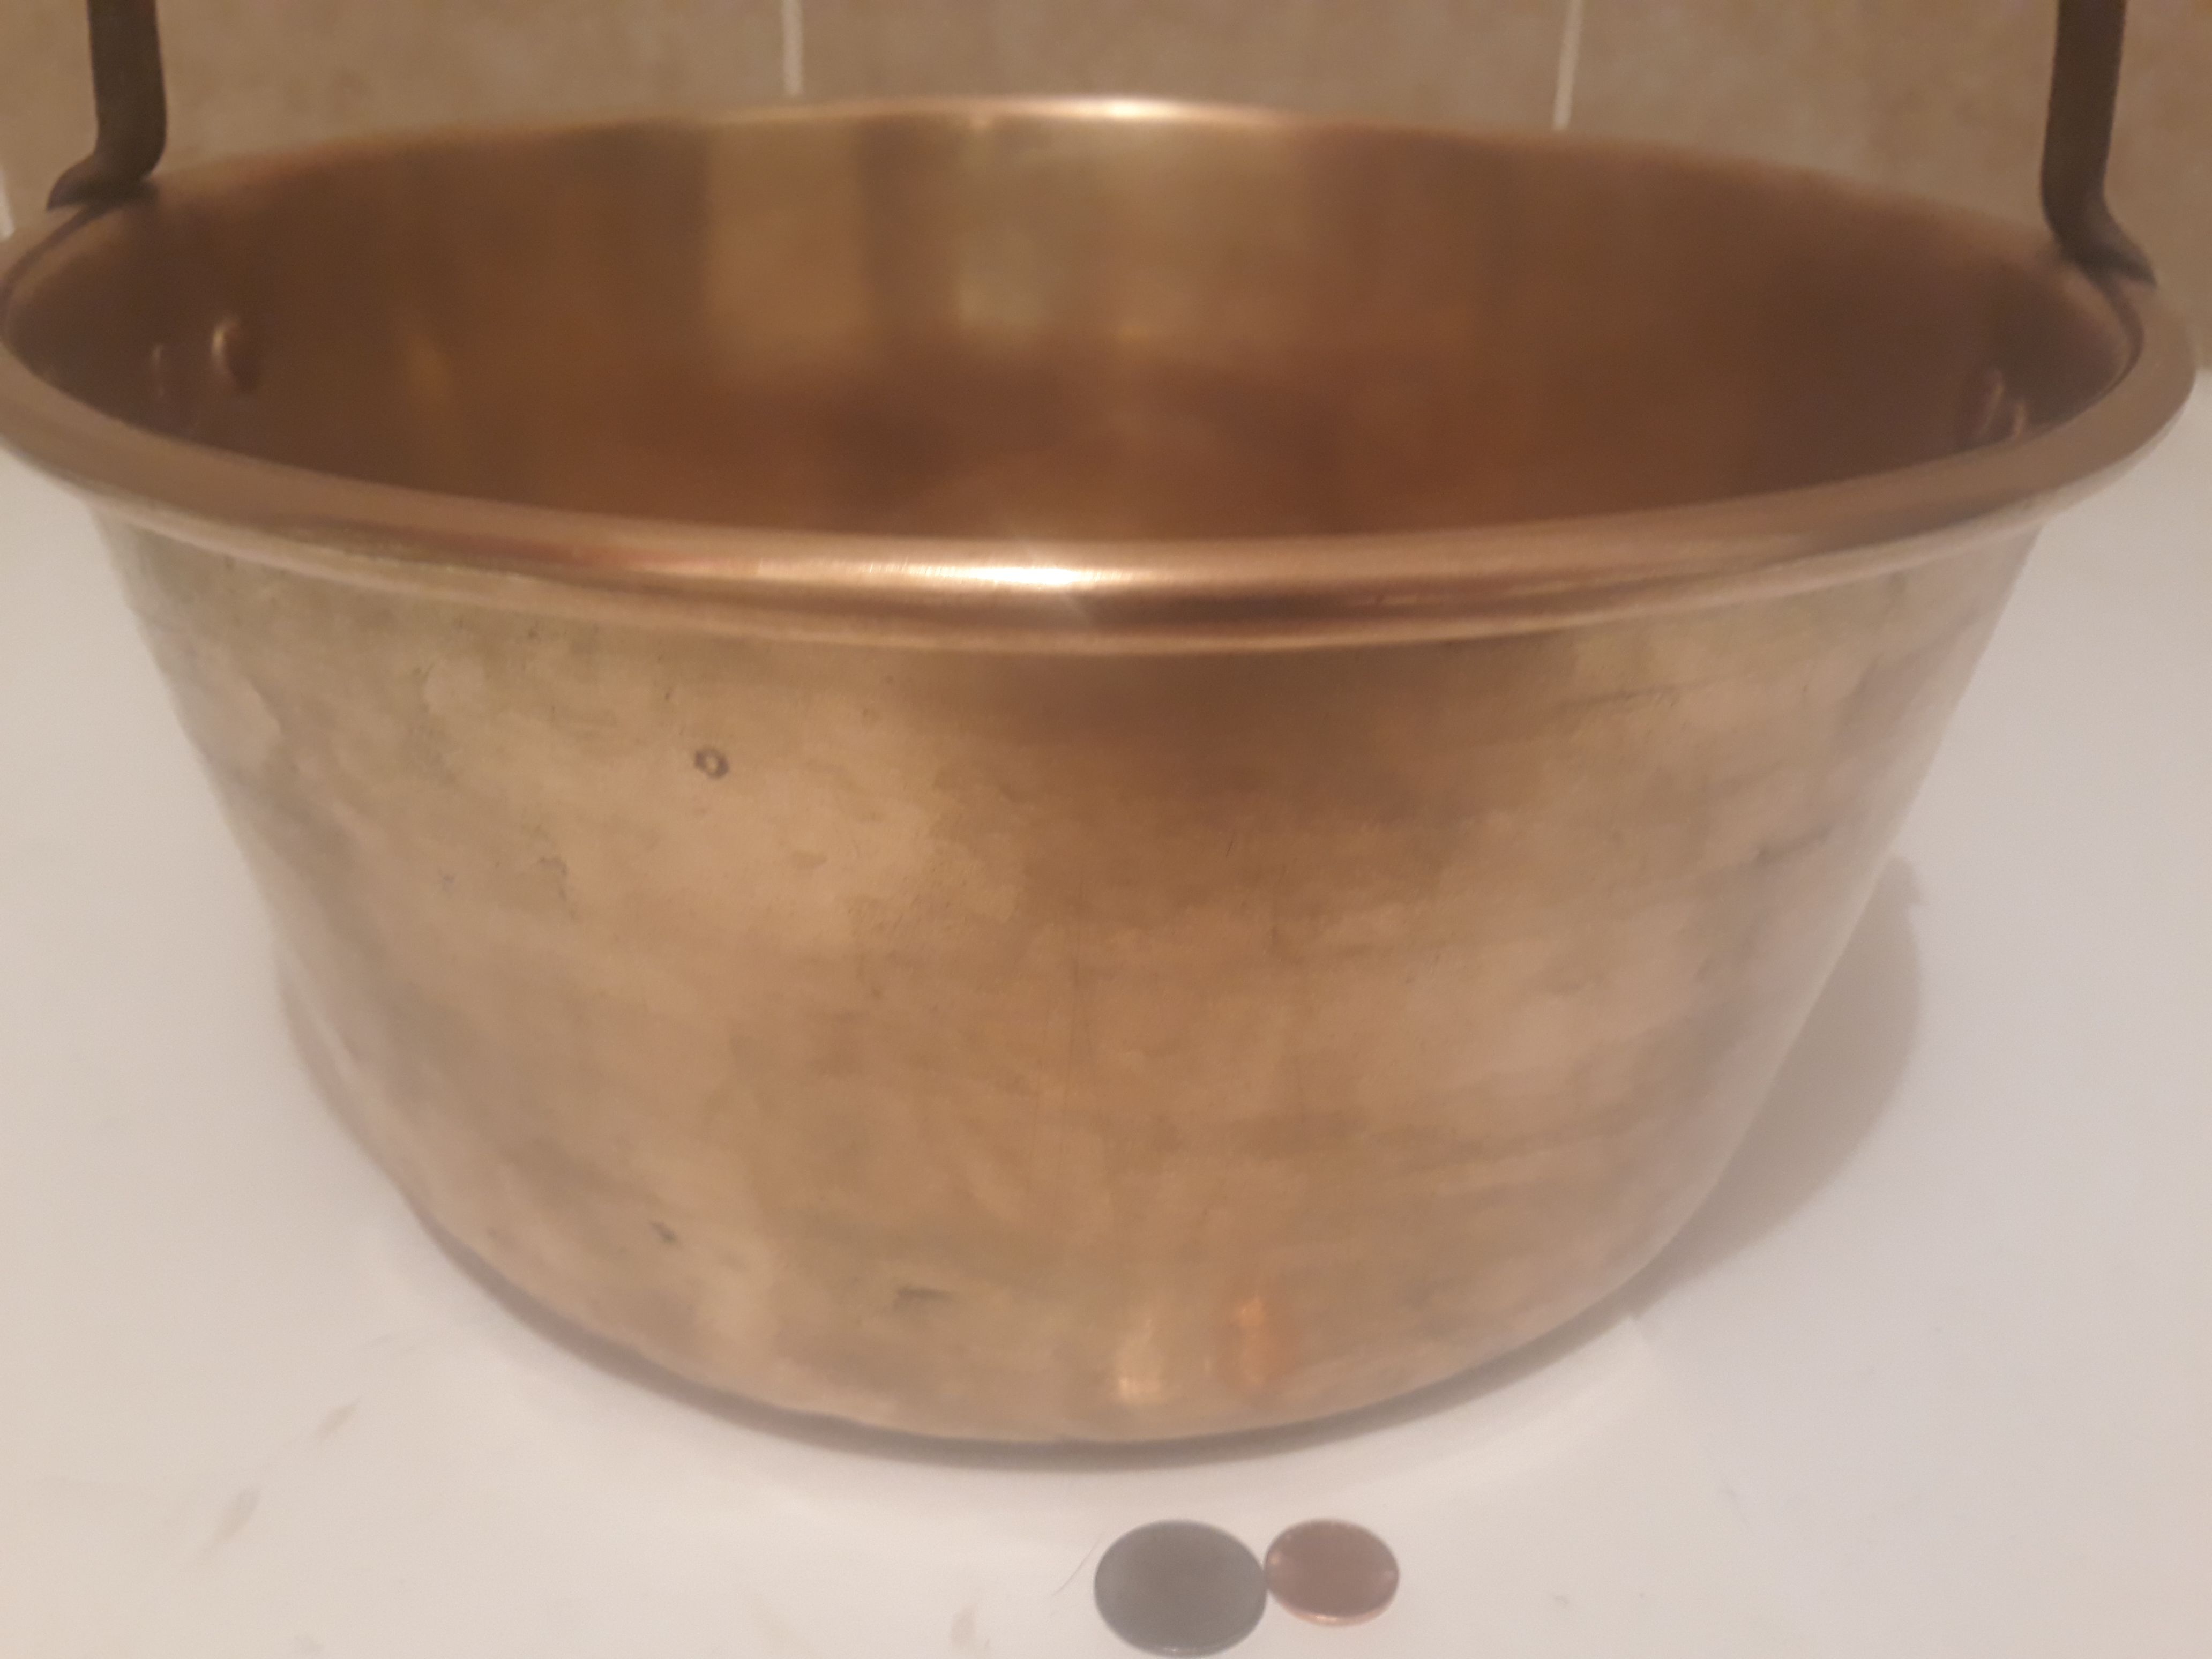 Vintage Heavy Candy Making BRASS COOKING POT ~ Circa 1870s Cookware